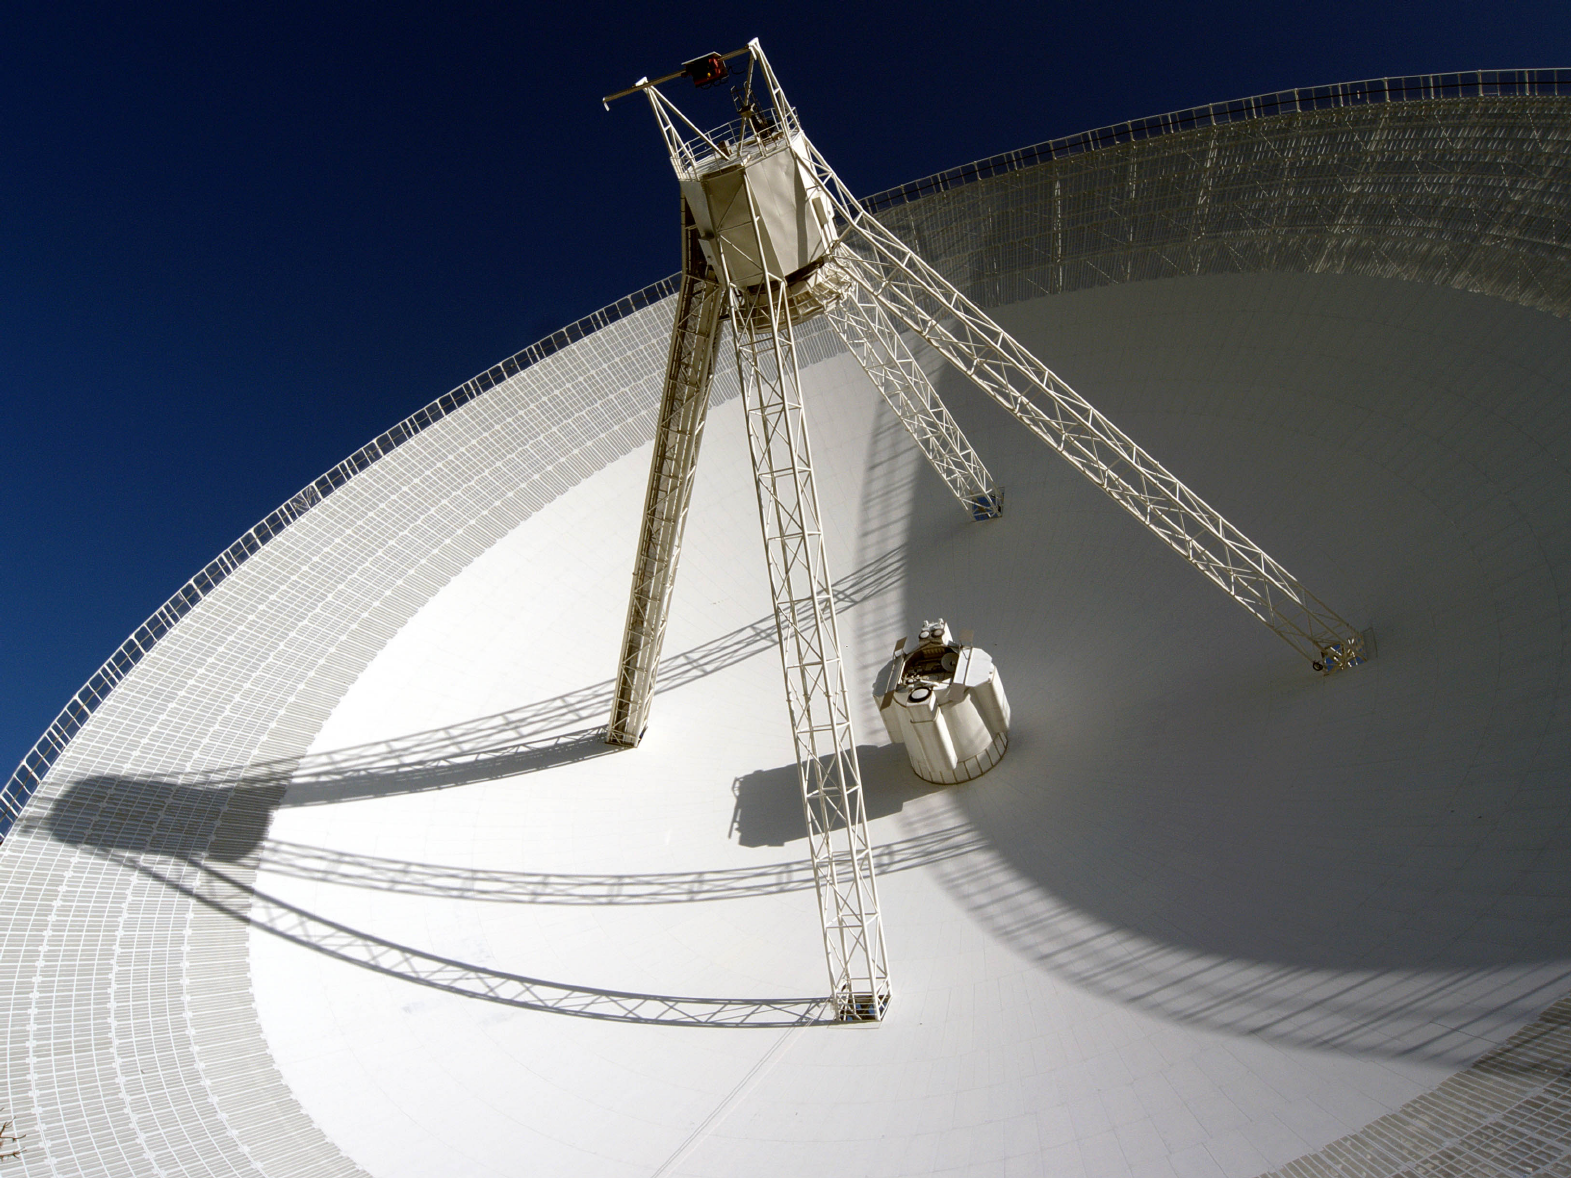 information_for_astronomers:user_guide:dish.png